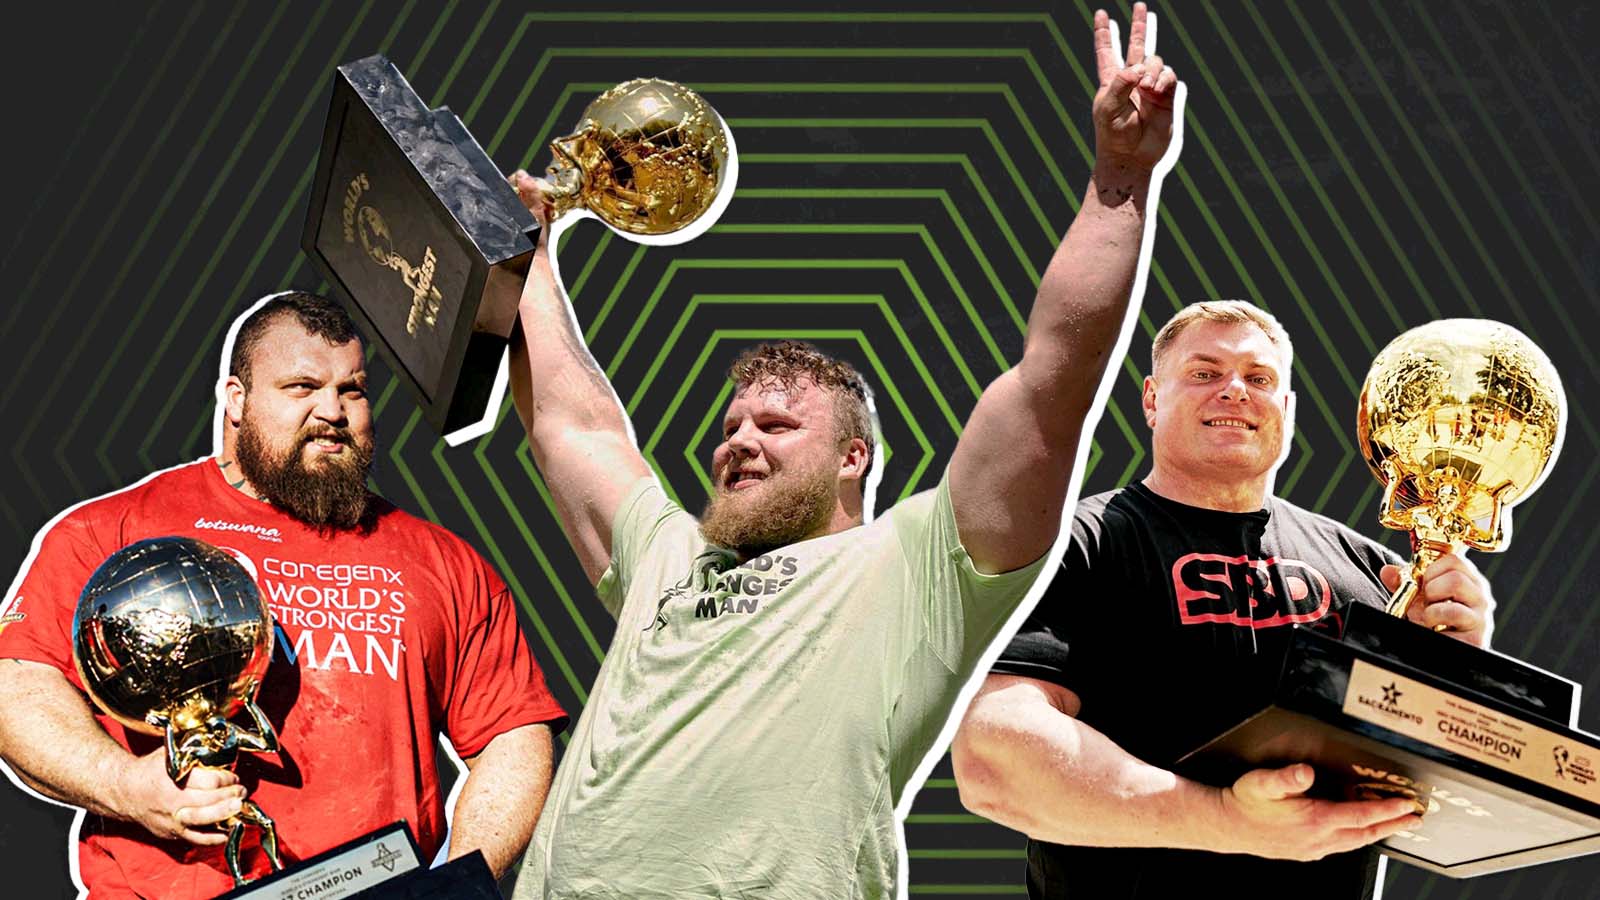 Every Winner of the World’s Strongest Man Competition BarBend